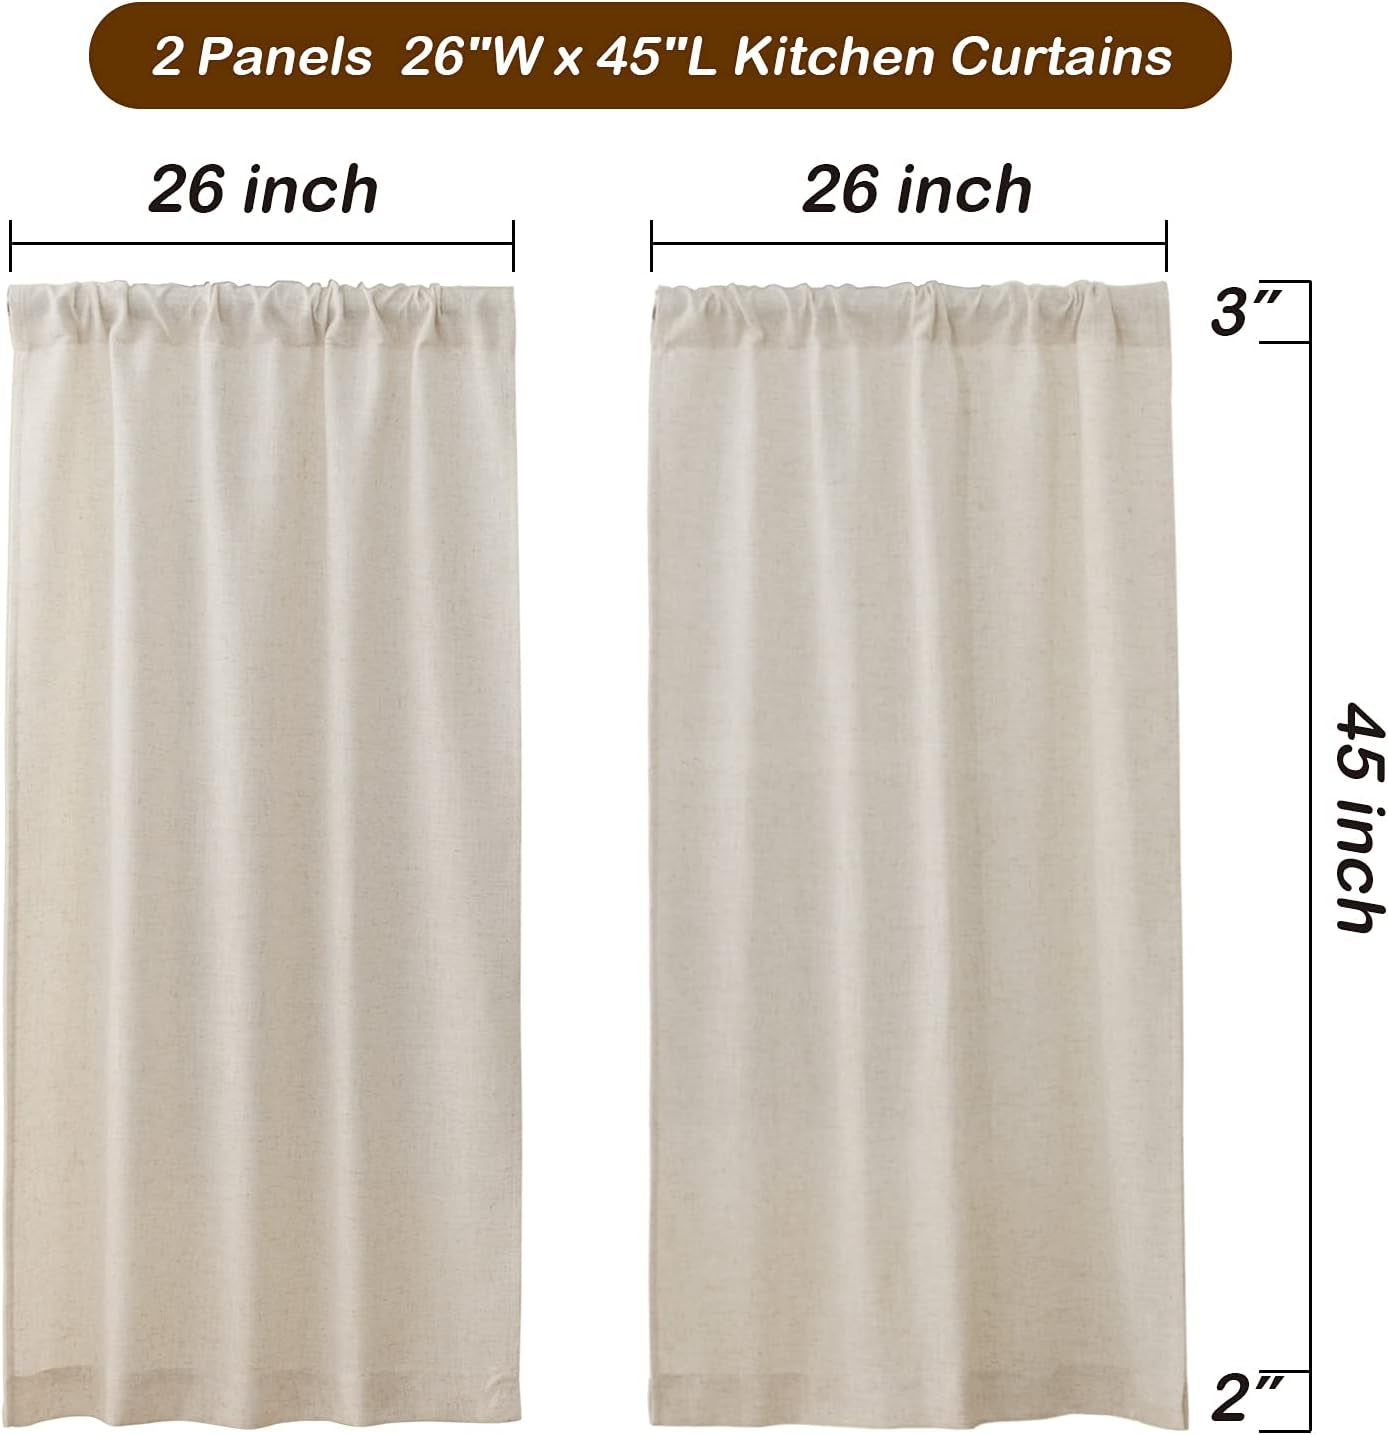 Valea Home Linen Kitchen Curtains 45 Inch Length Rustic Farmhouse Crude Short Cafe Curtains Rod Pocket Tiers for Small Window Bathroom Basement, Natural, 2 Panels  Valea Home   